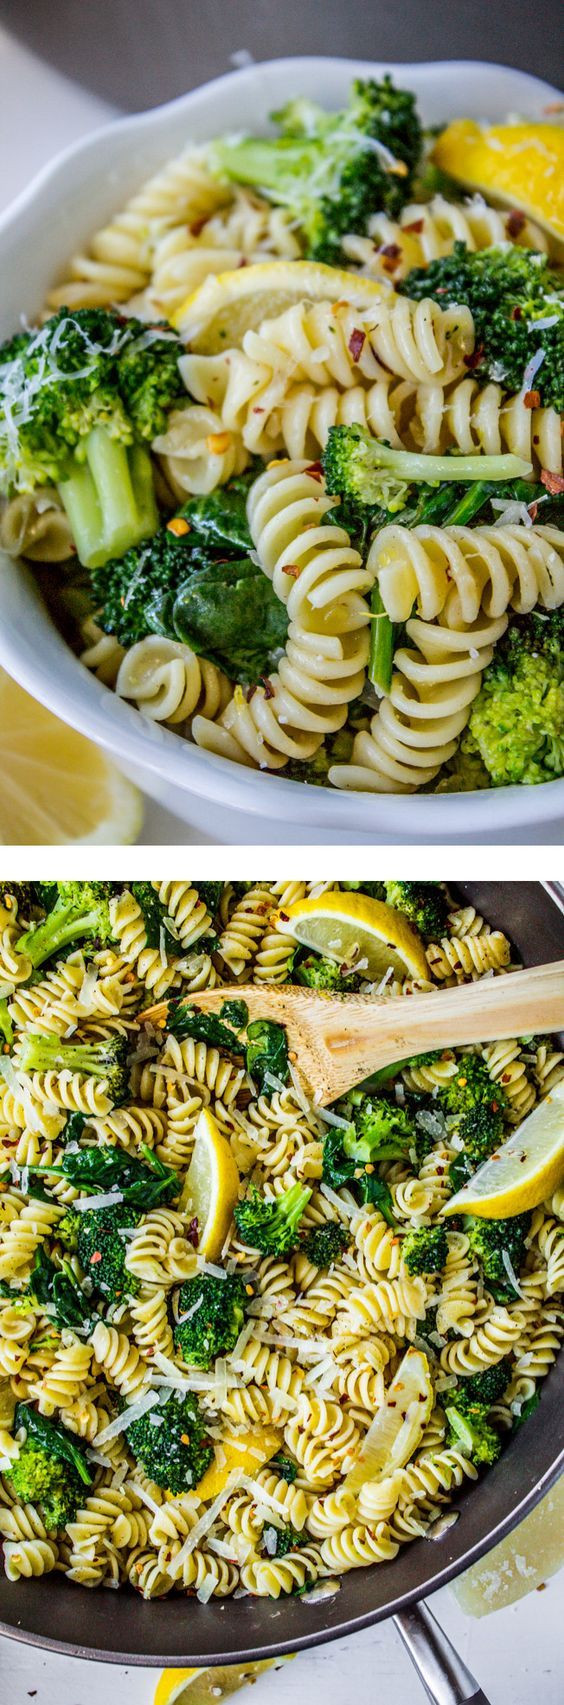 Healthy Quick Summer Dinners
 100 Easy healthy recipes on Pinterest